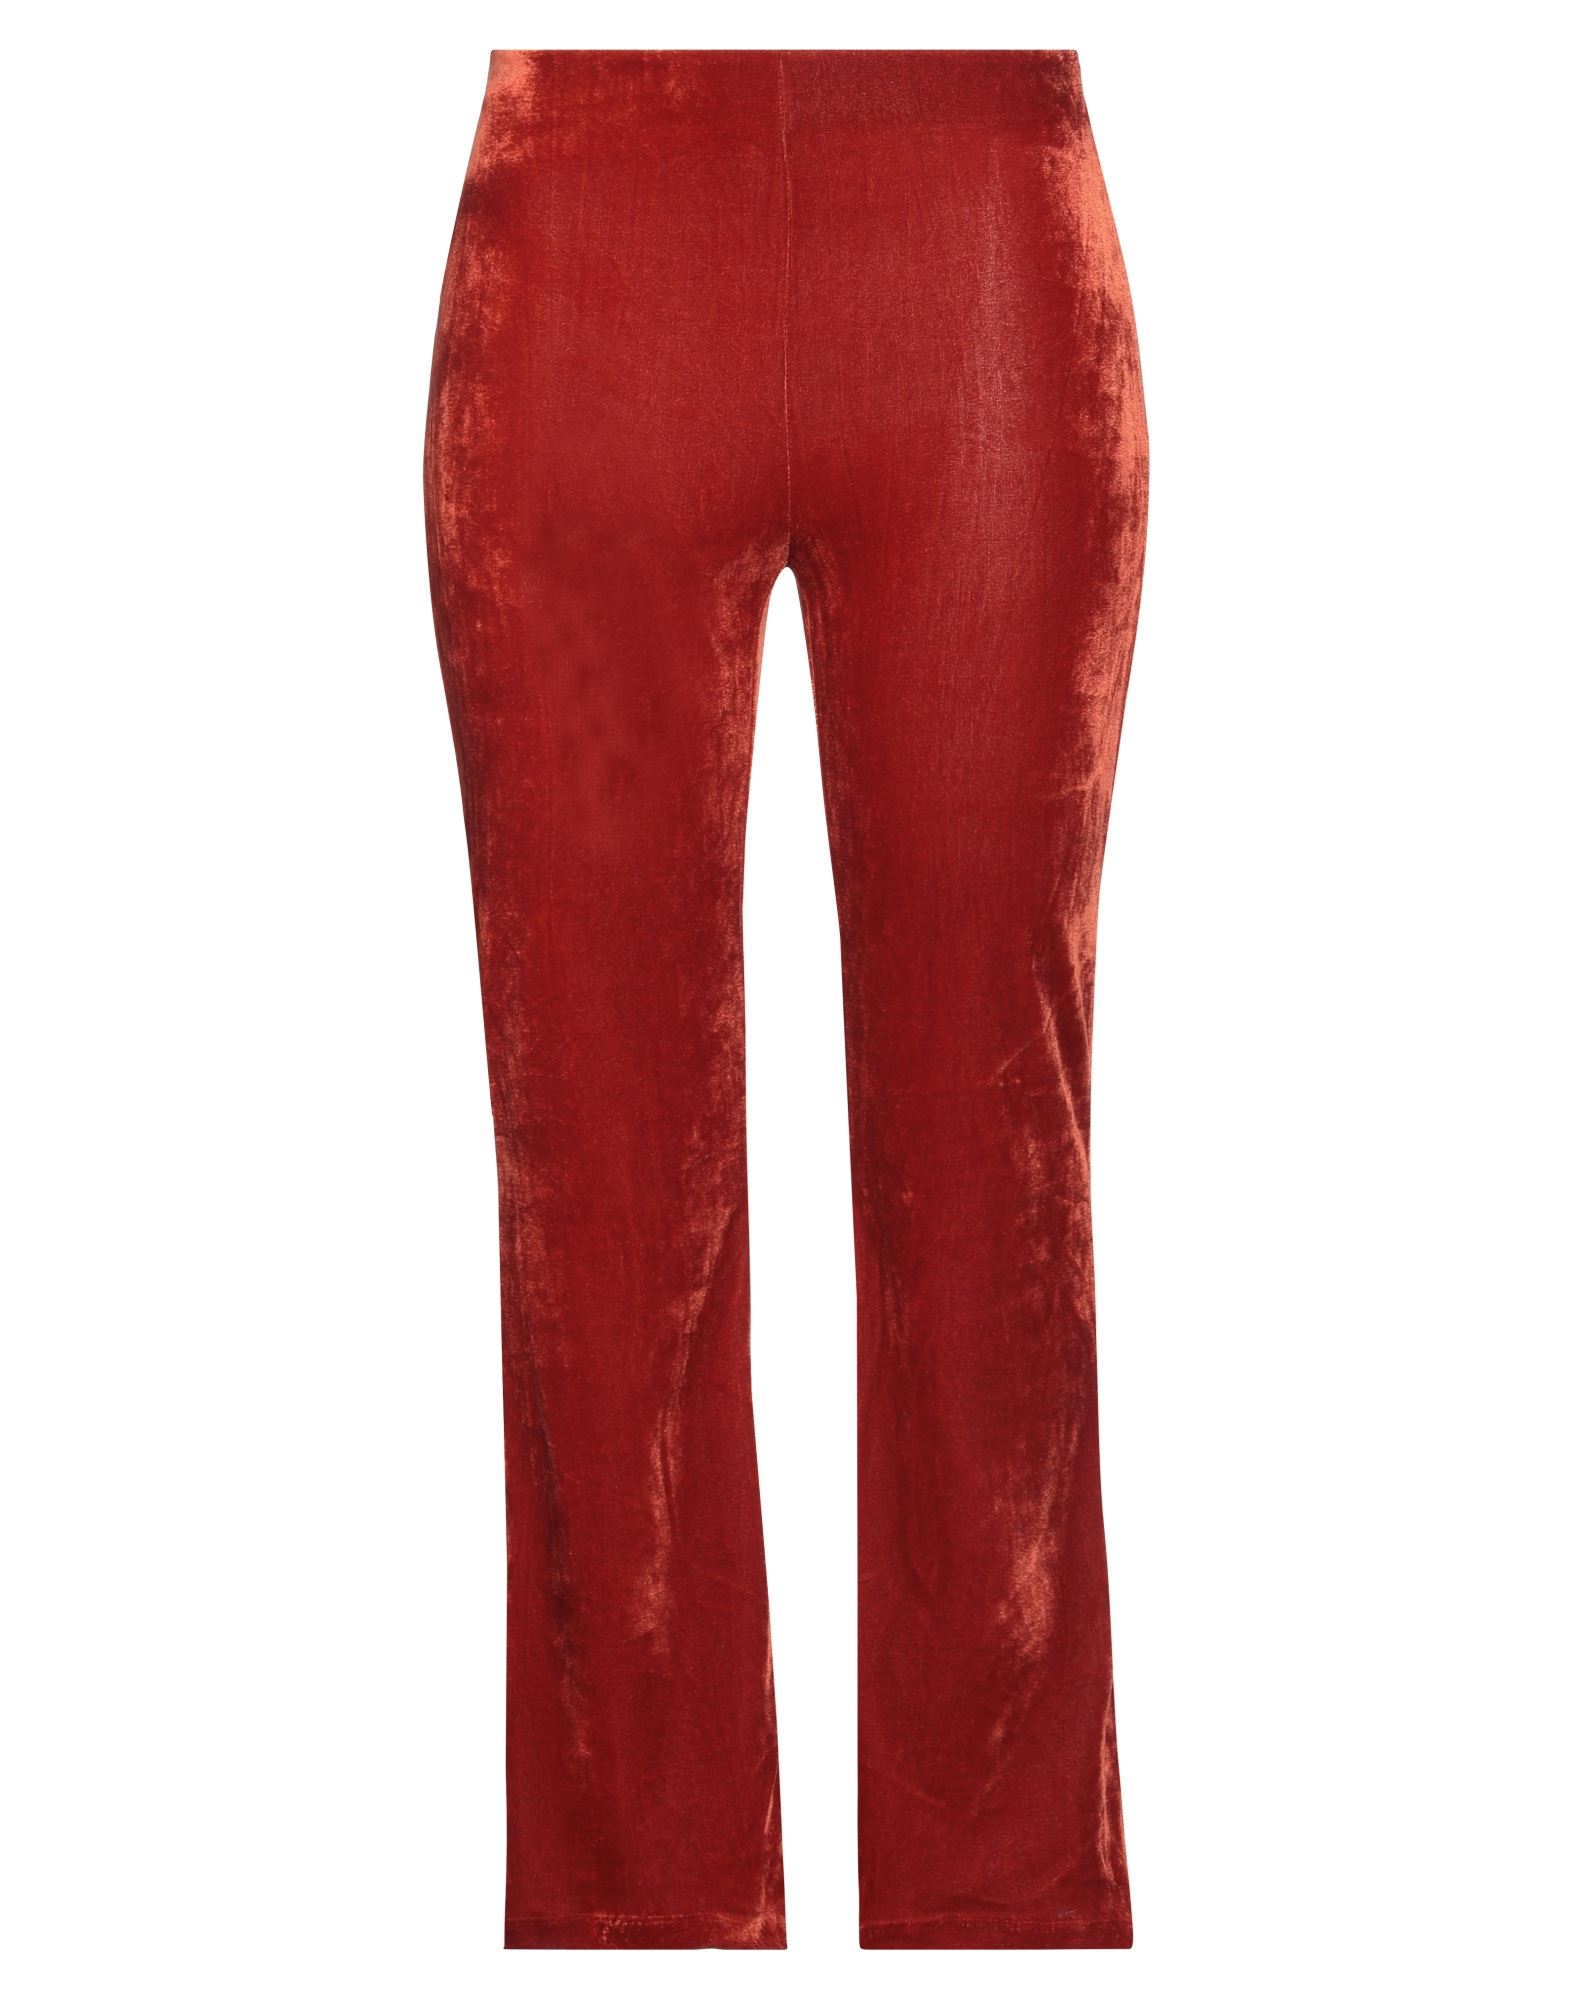 Paperlace London Pants In Red